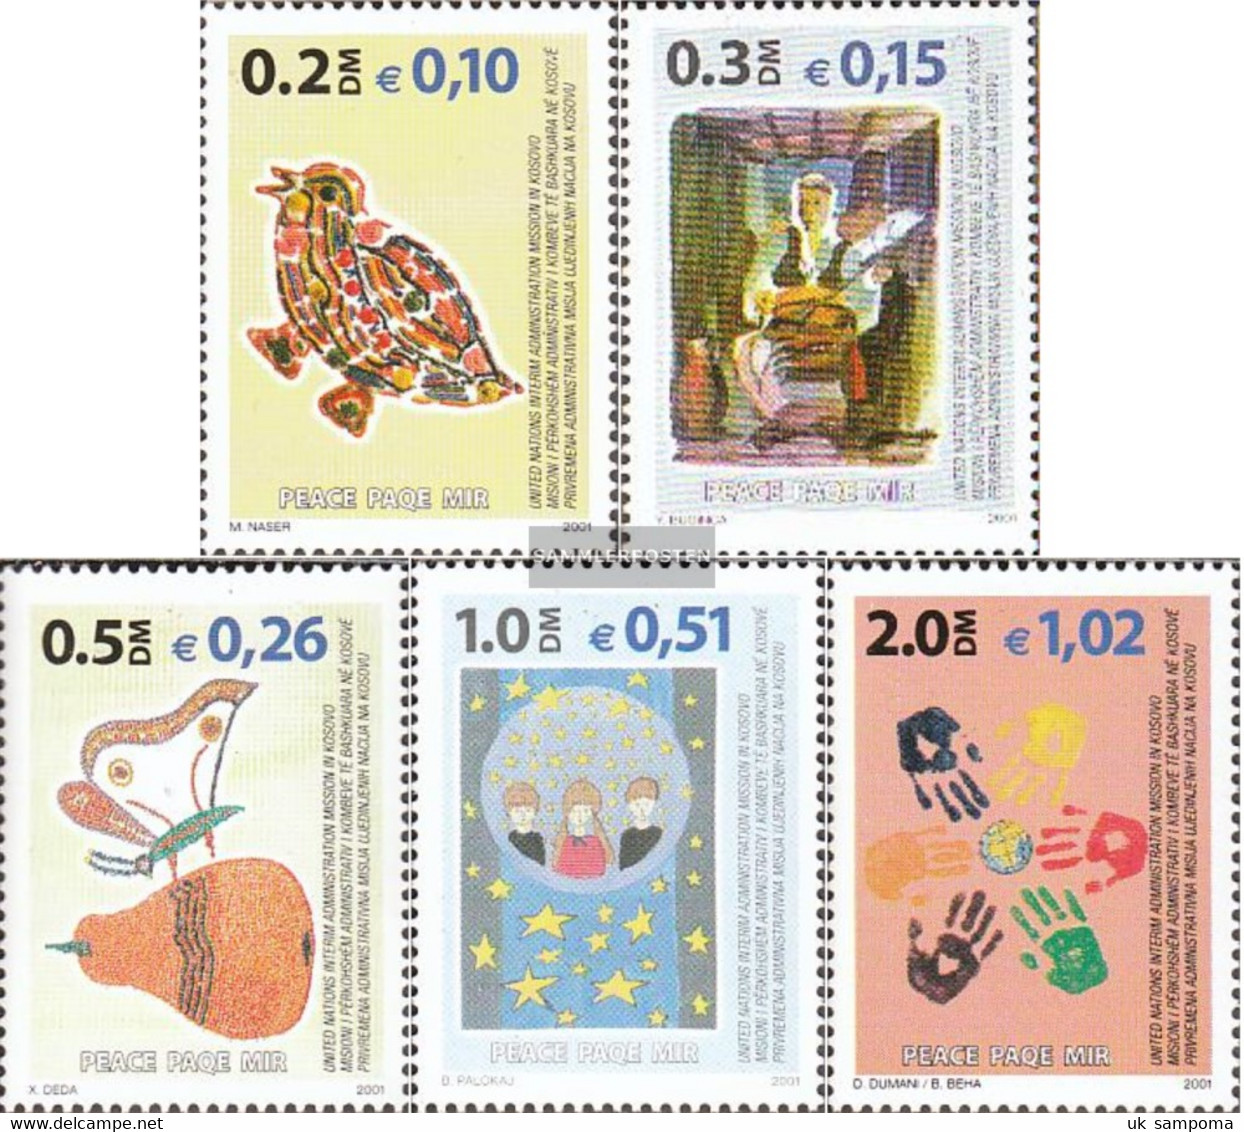 Kosovo 6-10 (complete Issue) Volume 2001 Completeett Unmounted Mint / Never Hinged 2001 Peace In Kosovo - Unused Stamps